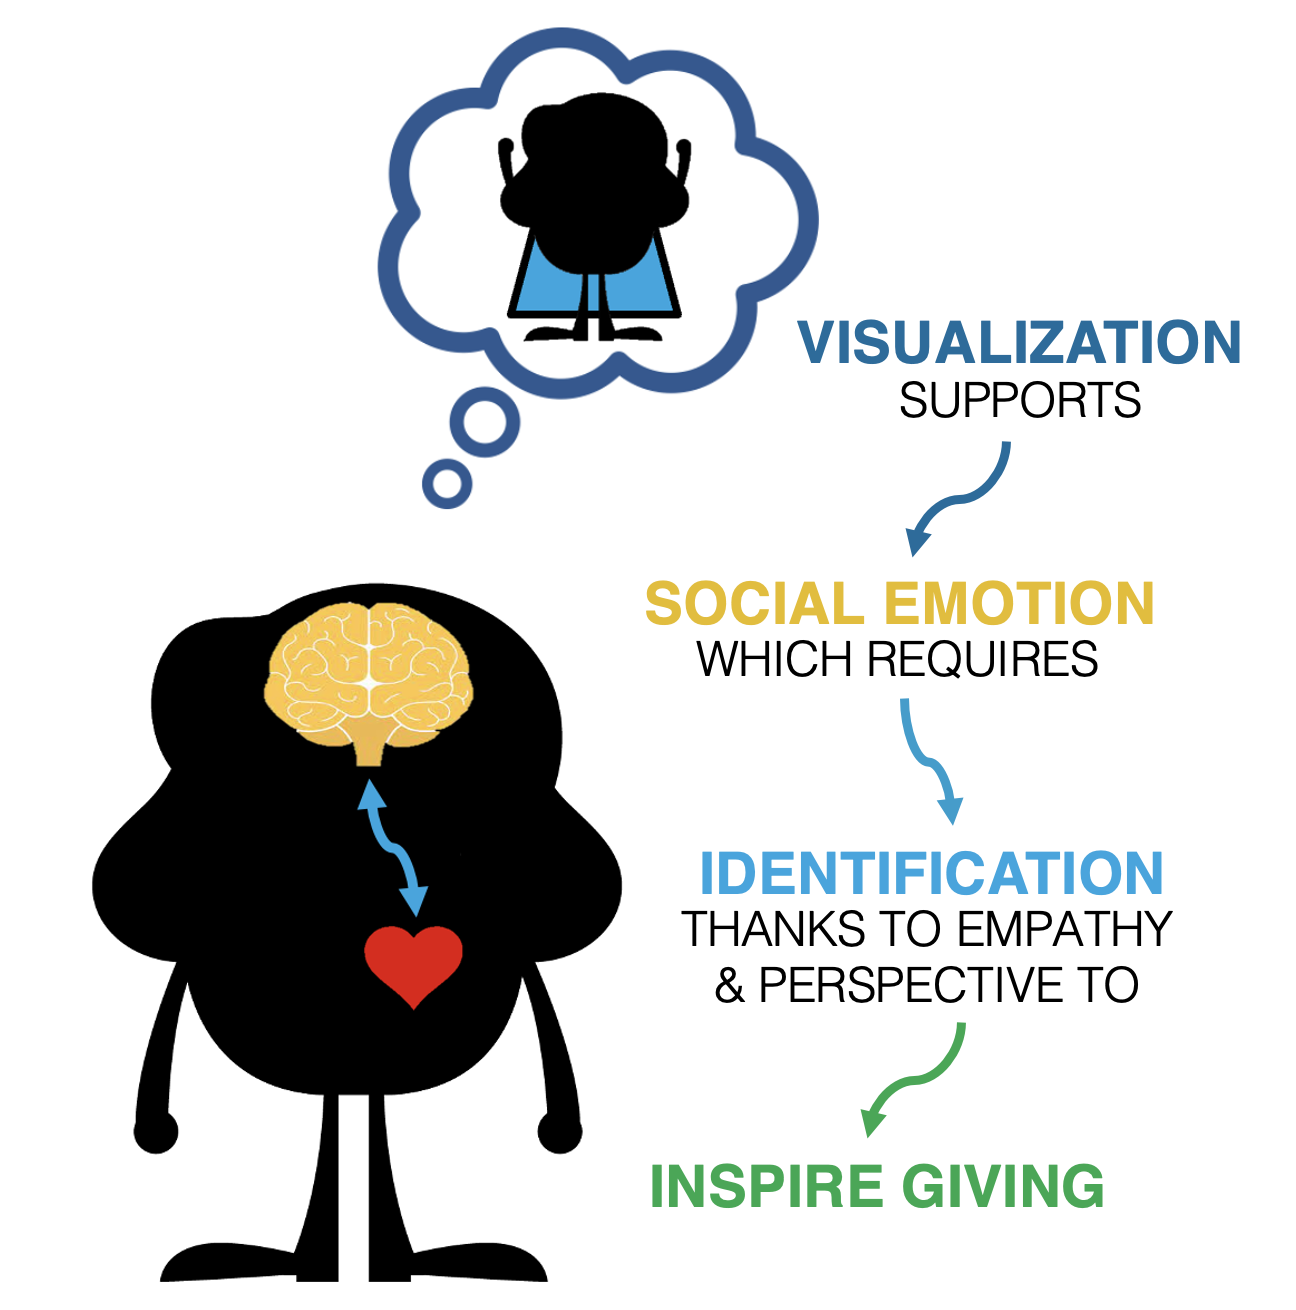 In neuroimaging, donors mus visualize to support social emotion which requires identification - AKA empathy and perspective to inspire giving